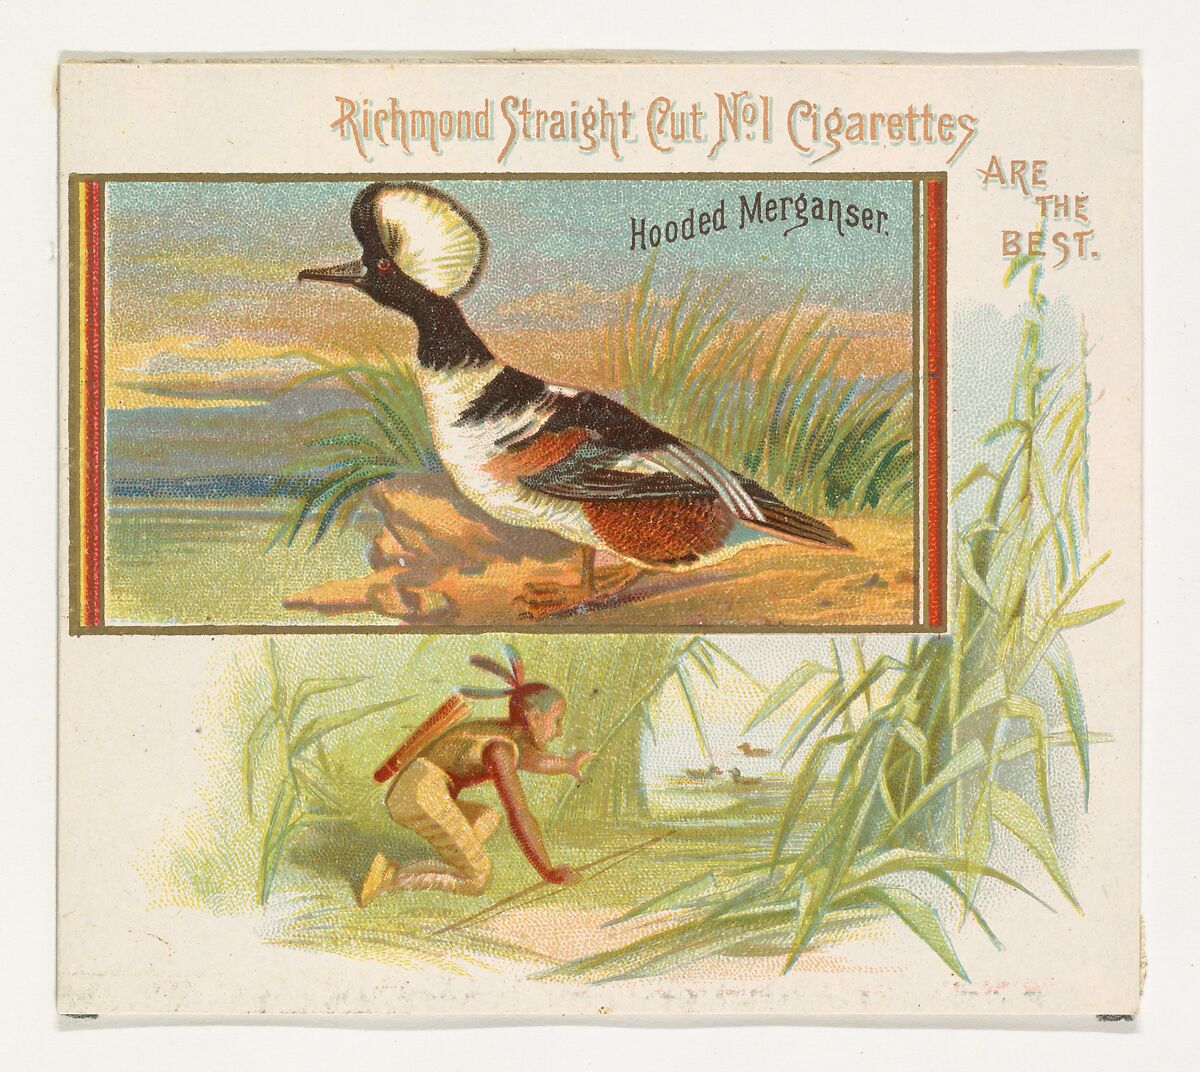 Hooded Merganser, from the Game Birds series (N40) for Allen & Ginter Cigarettes, Issued by Allen &amp; Ginter (American, Richmond, Virginia), Commercial color lithograph 